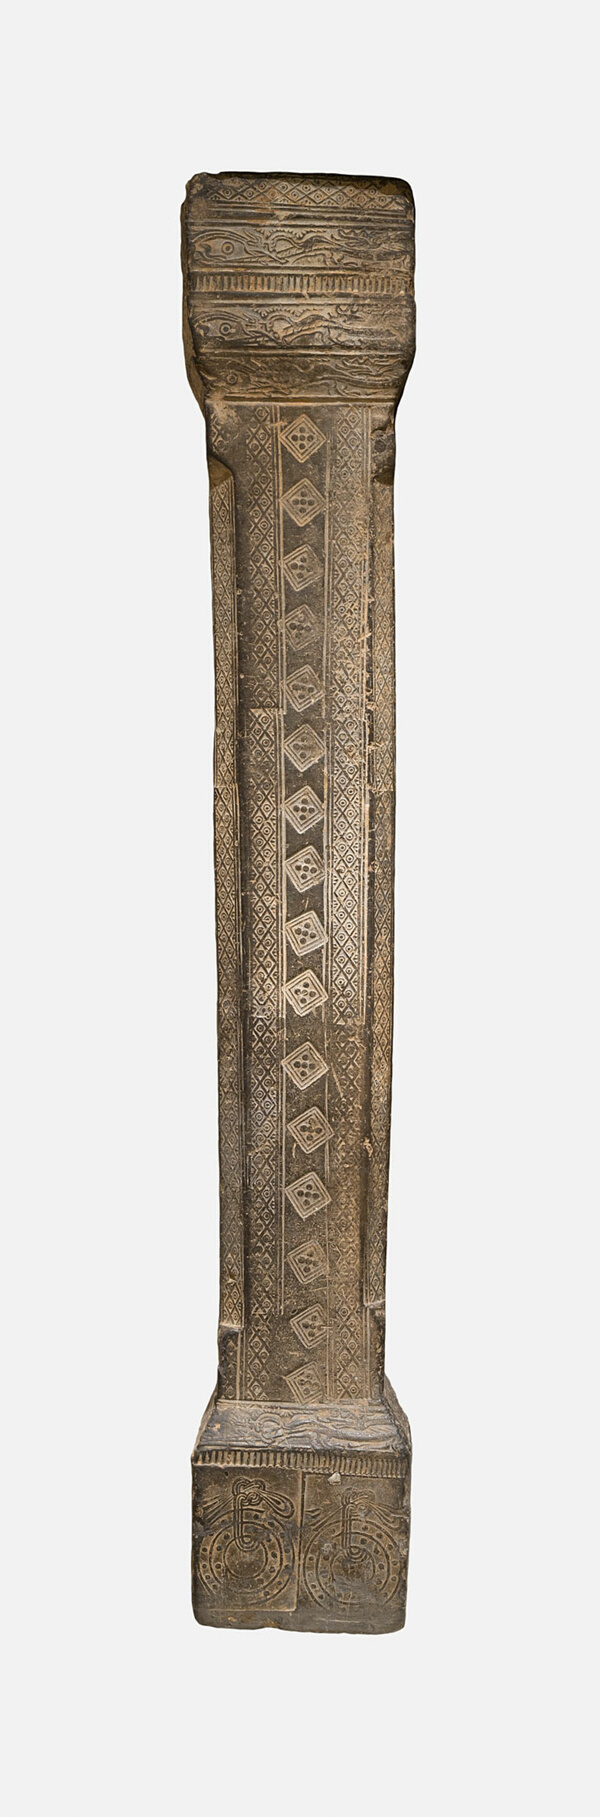 Pillar from Tomb Chamber